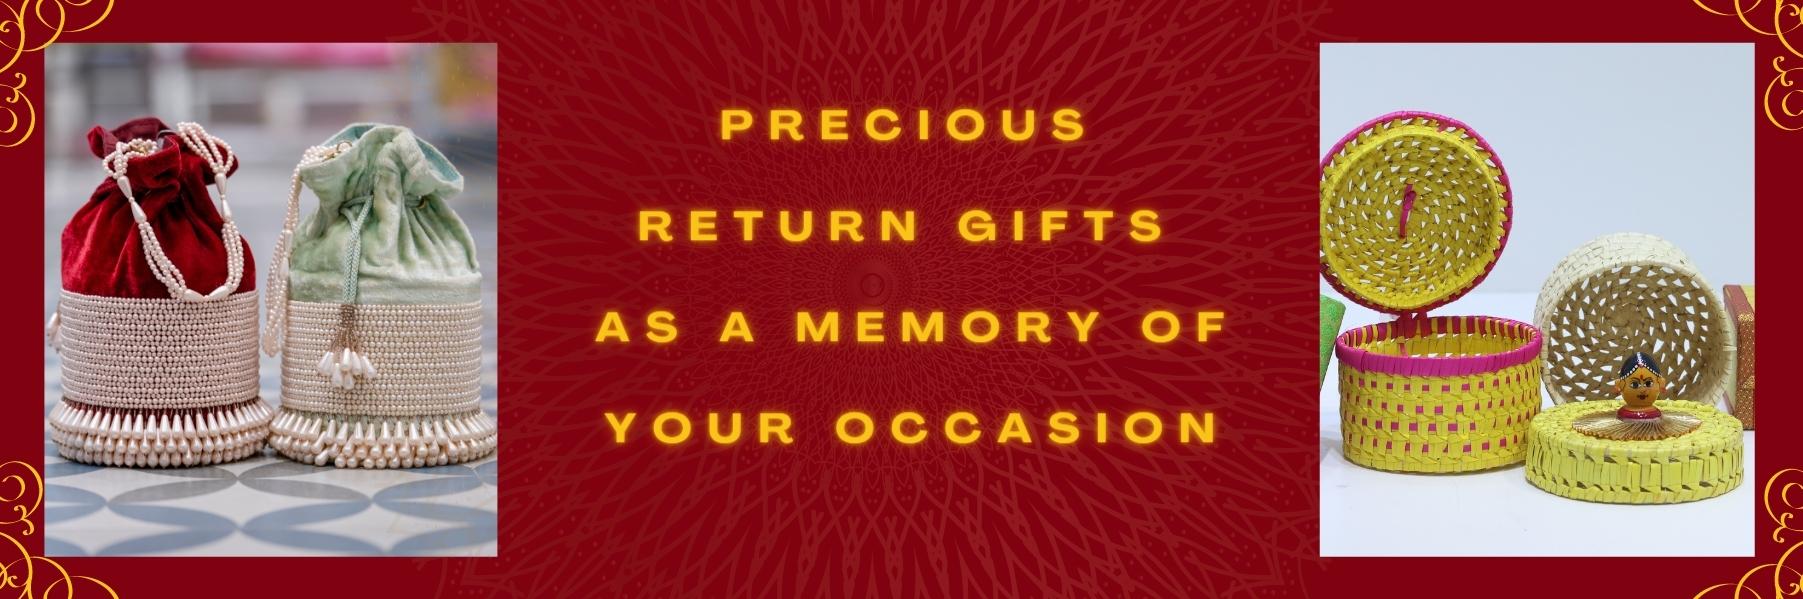 Precious Return gifts as a memory of your occasion